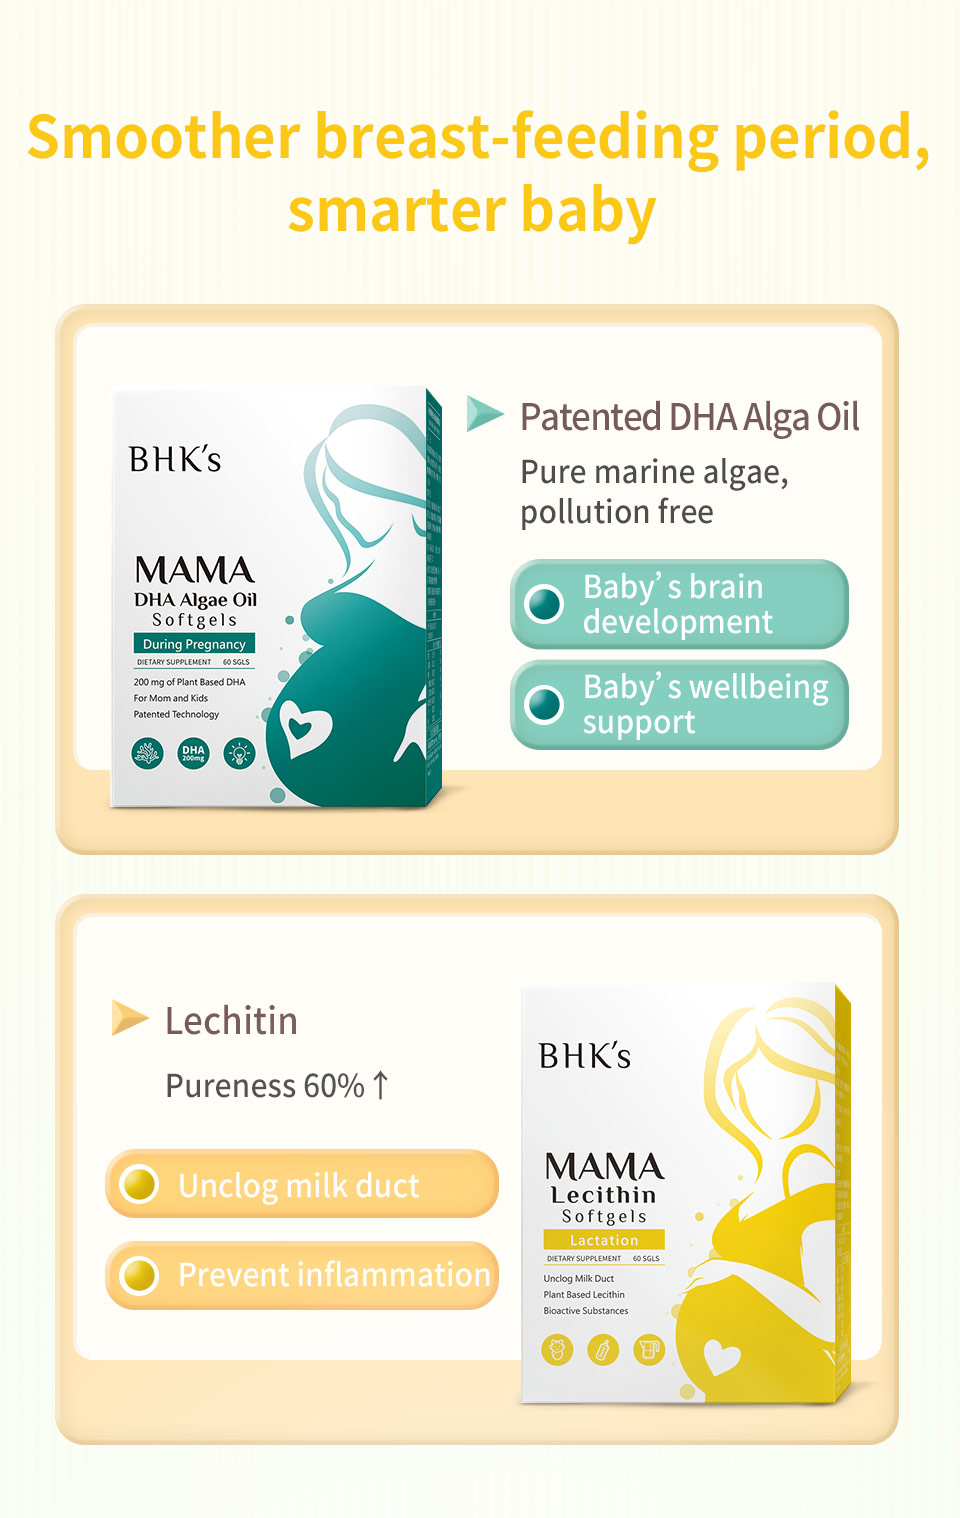 DHA pregnancy Algae Oil from BHK helps with children intellectual ability and retina development 